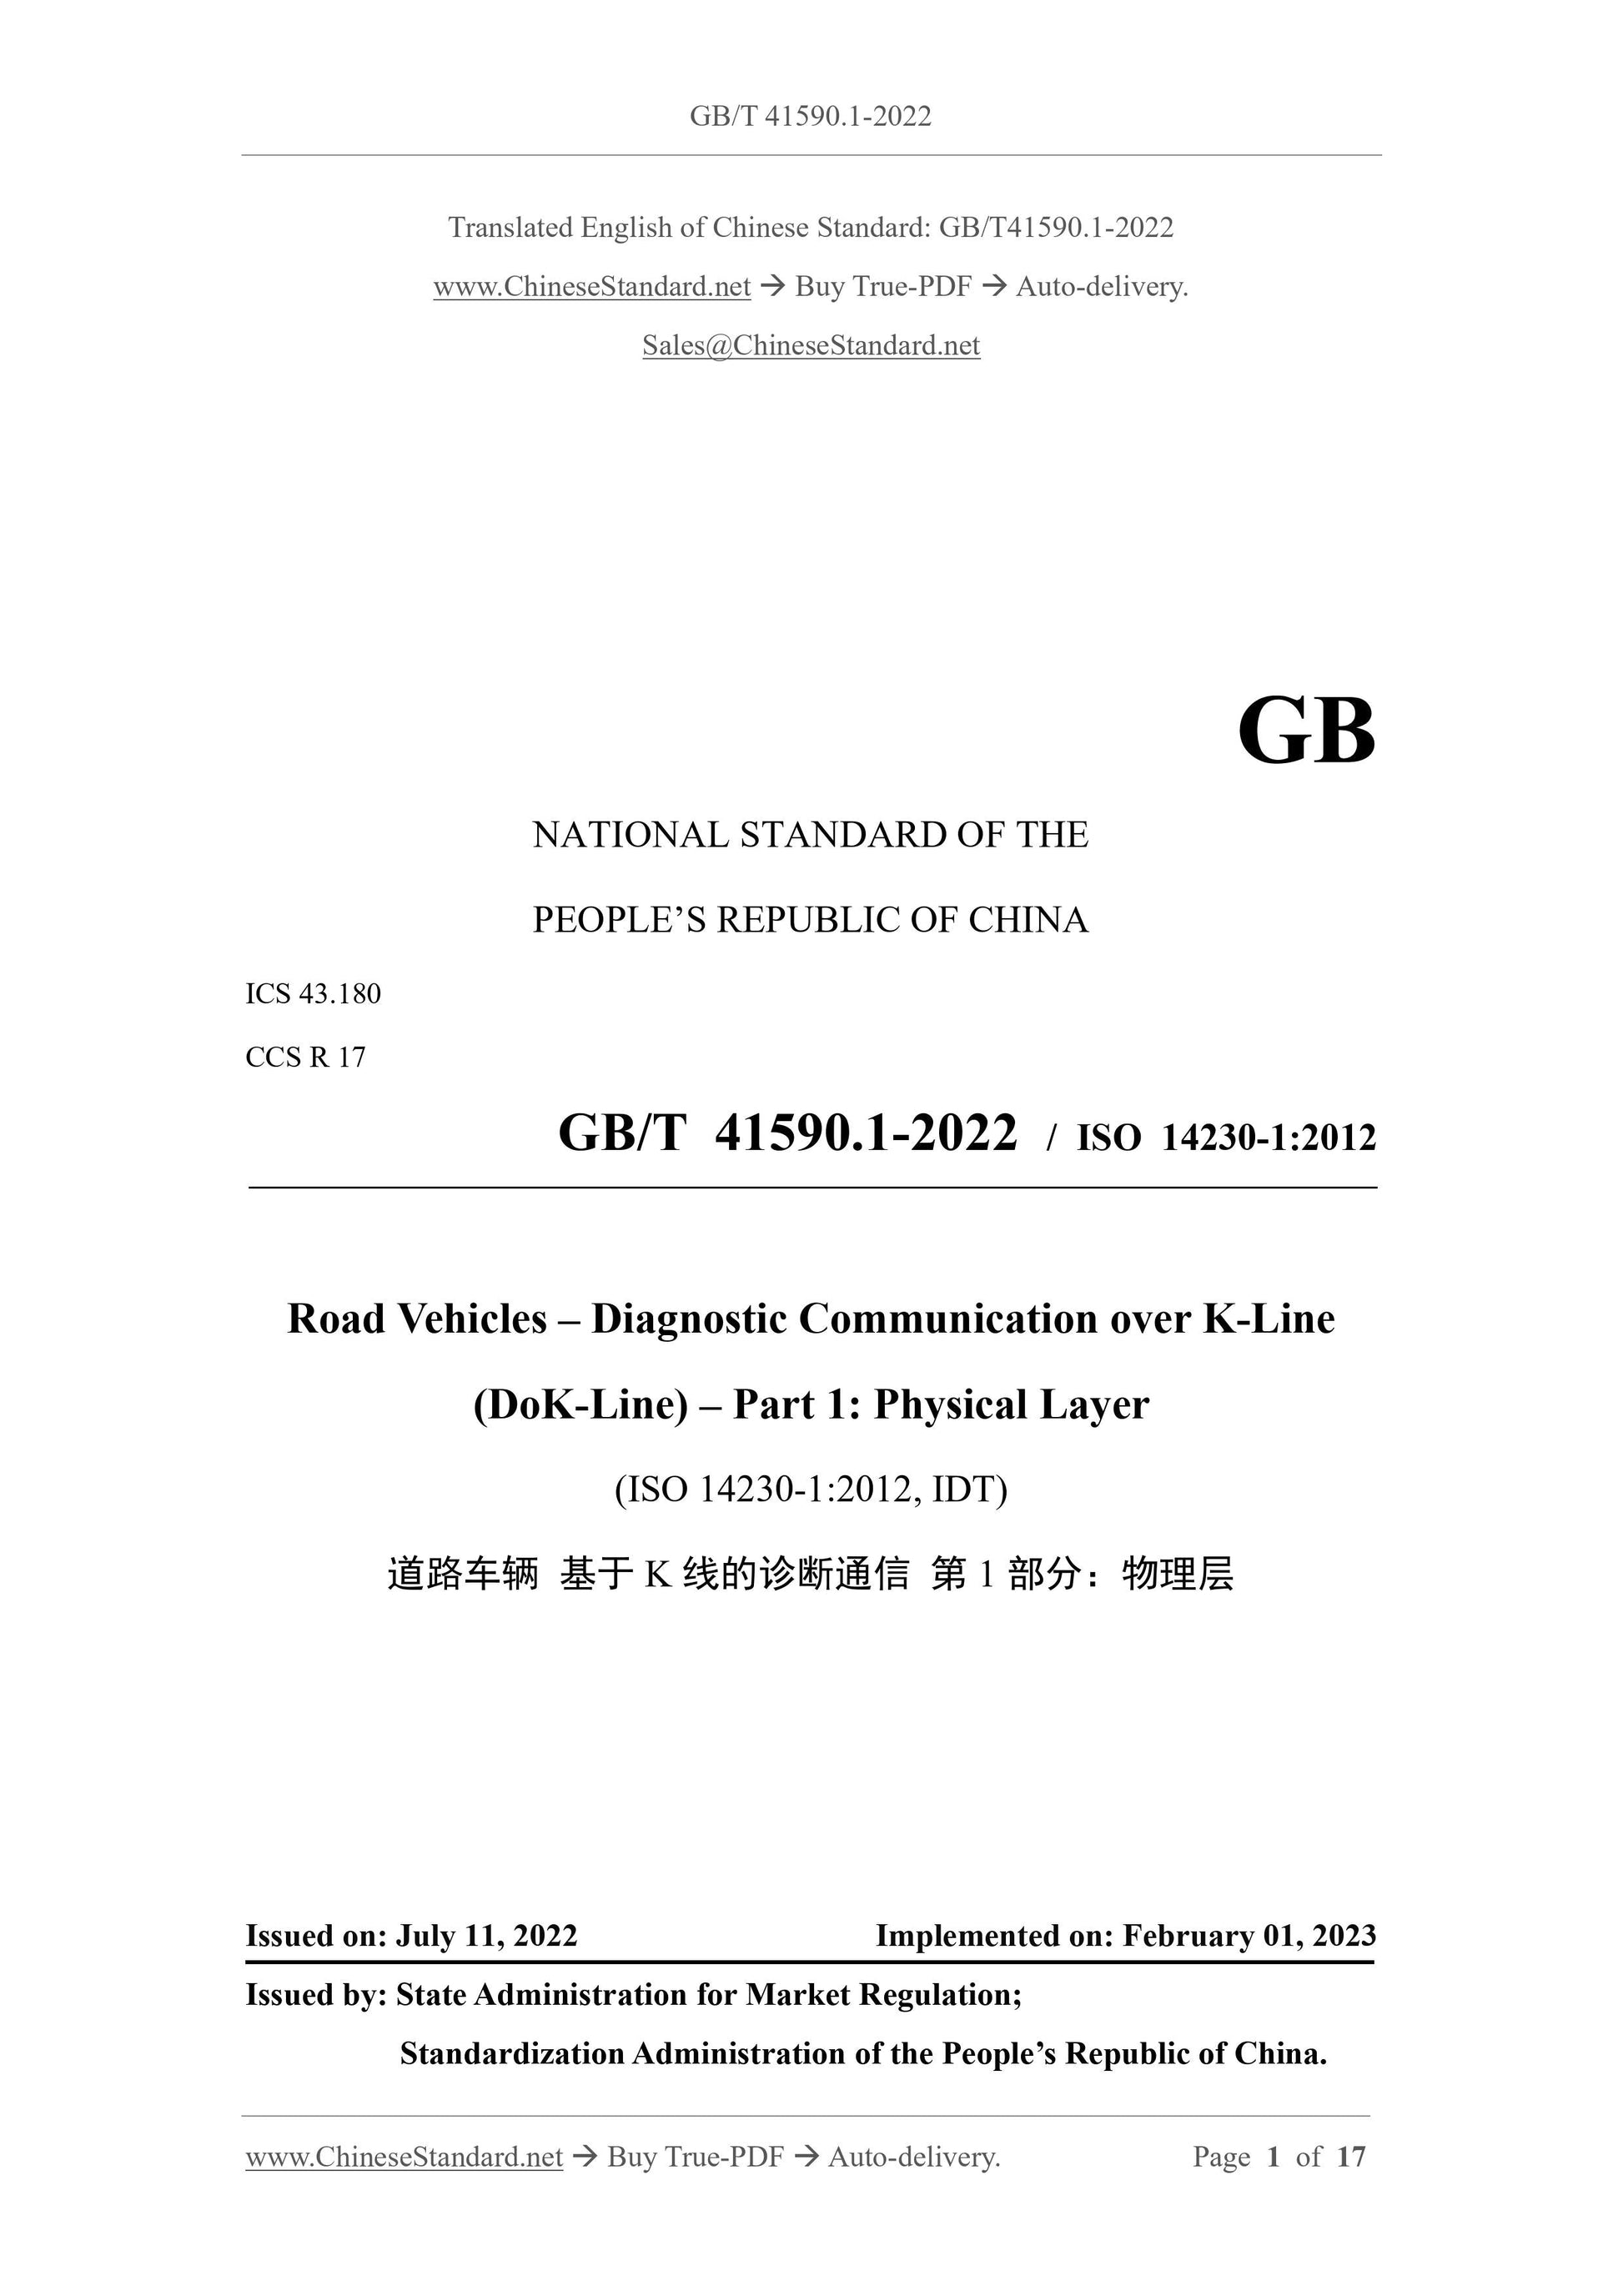 GB/T 41590.1-2022 Page 1